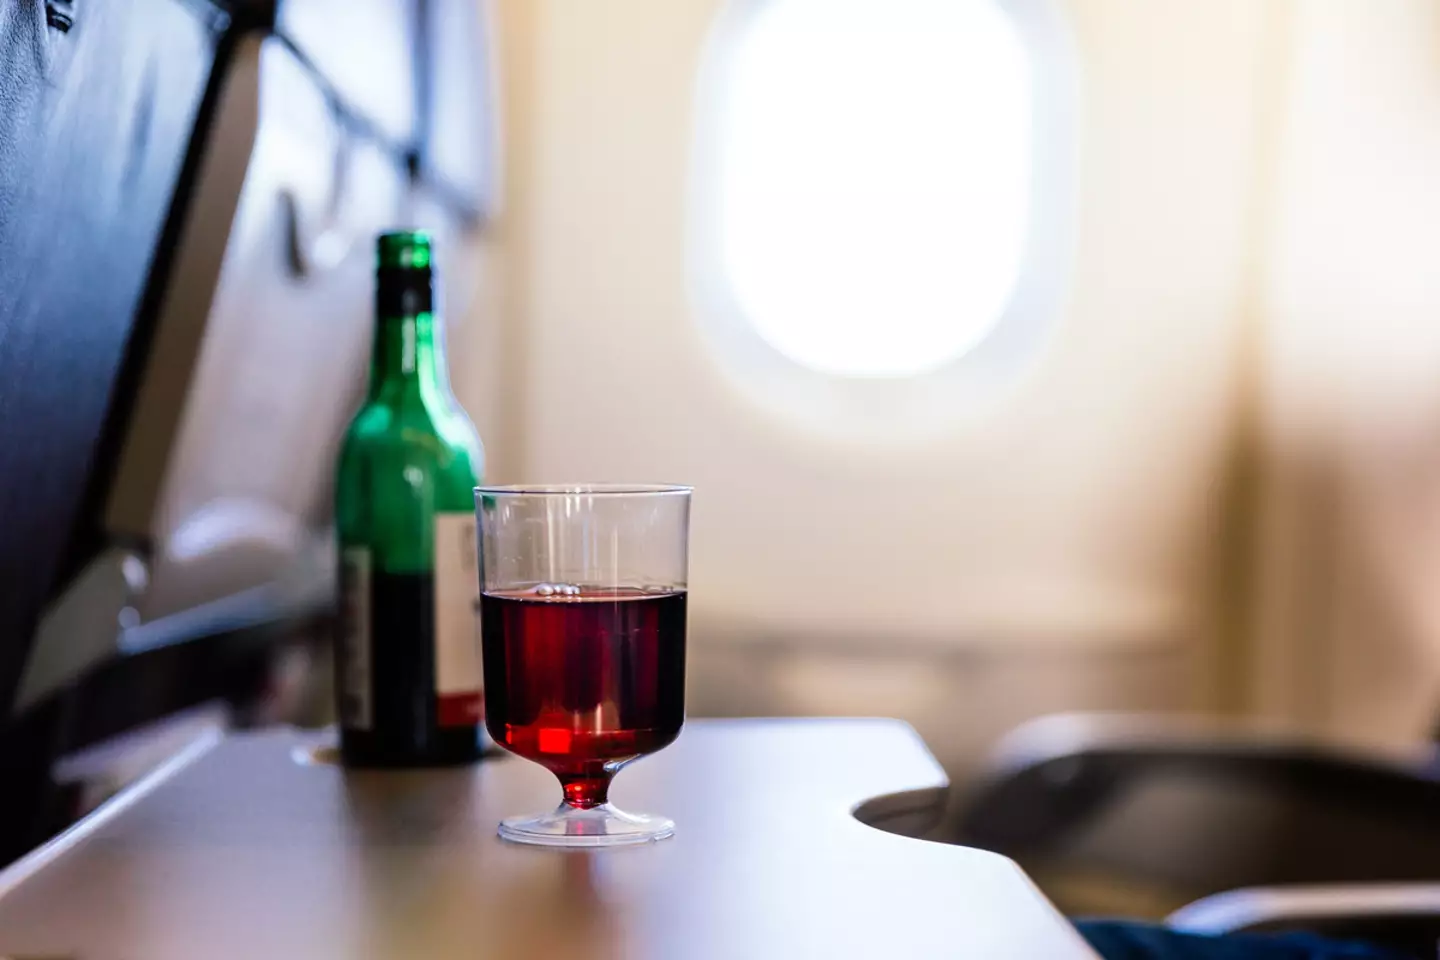 Consuming your own alcohol on a flight is not allowed.